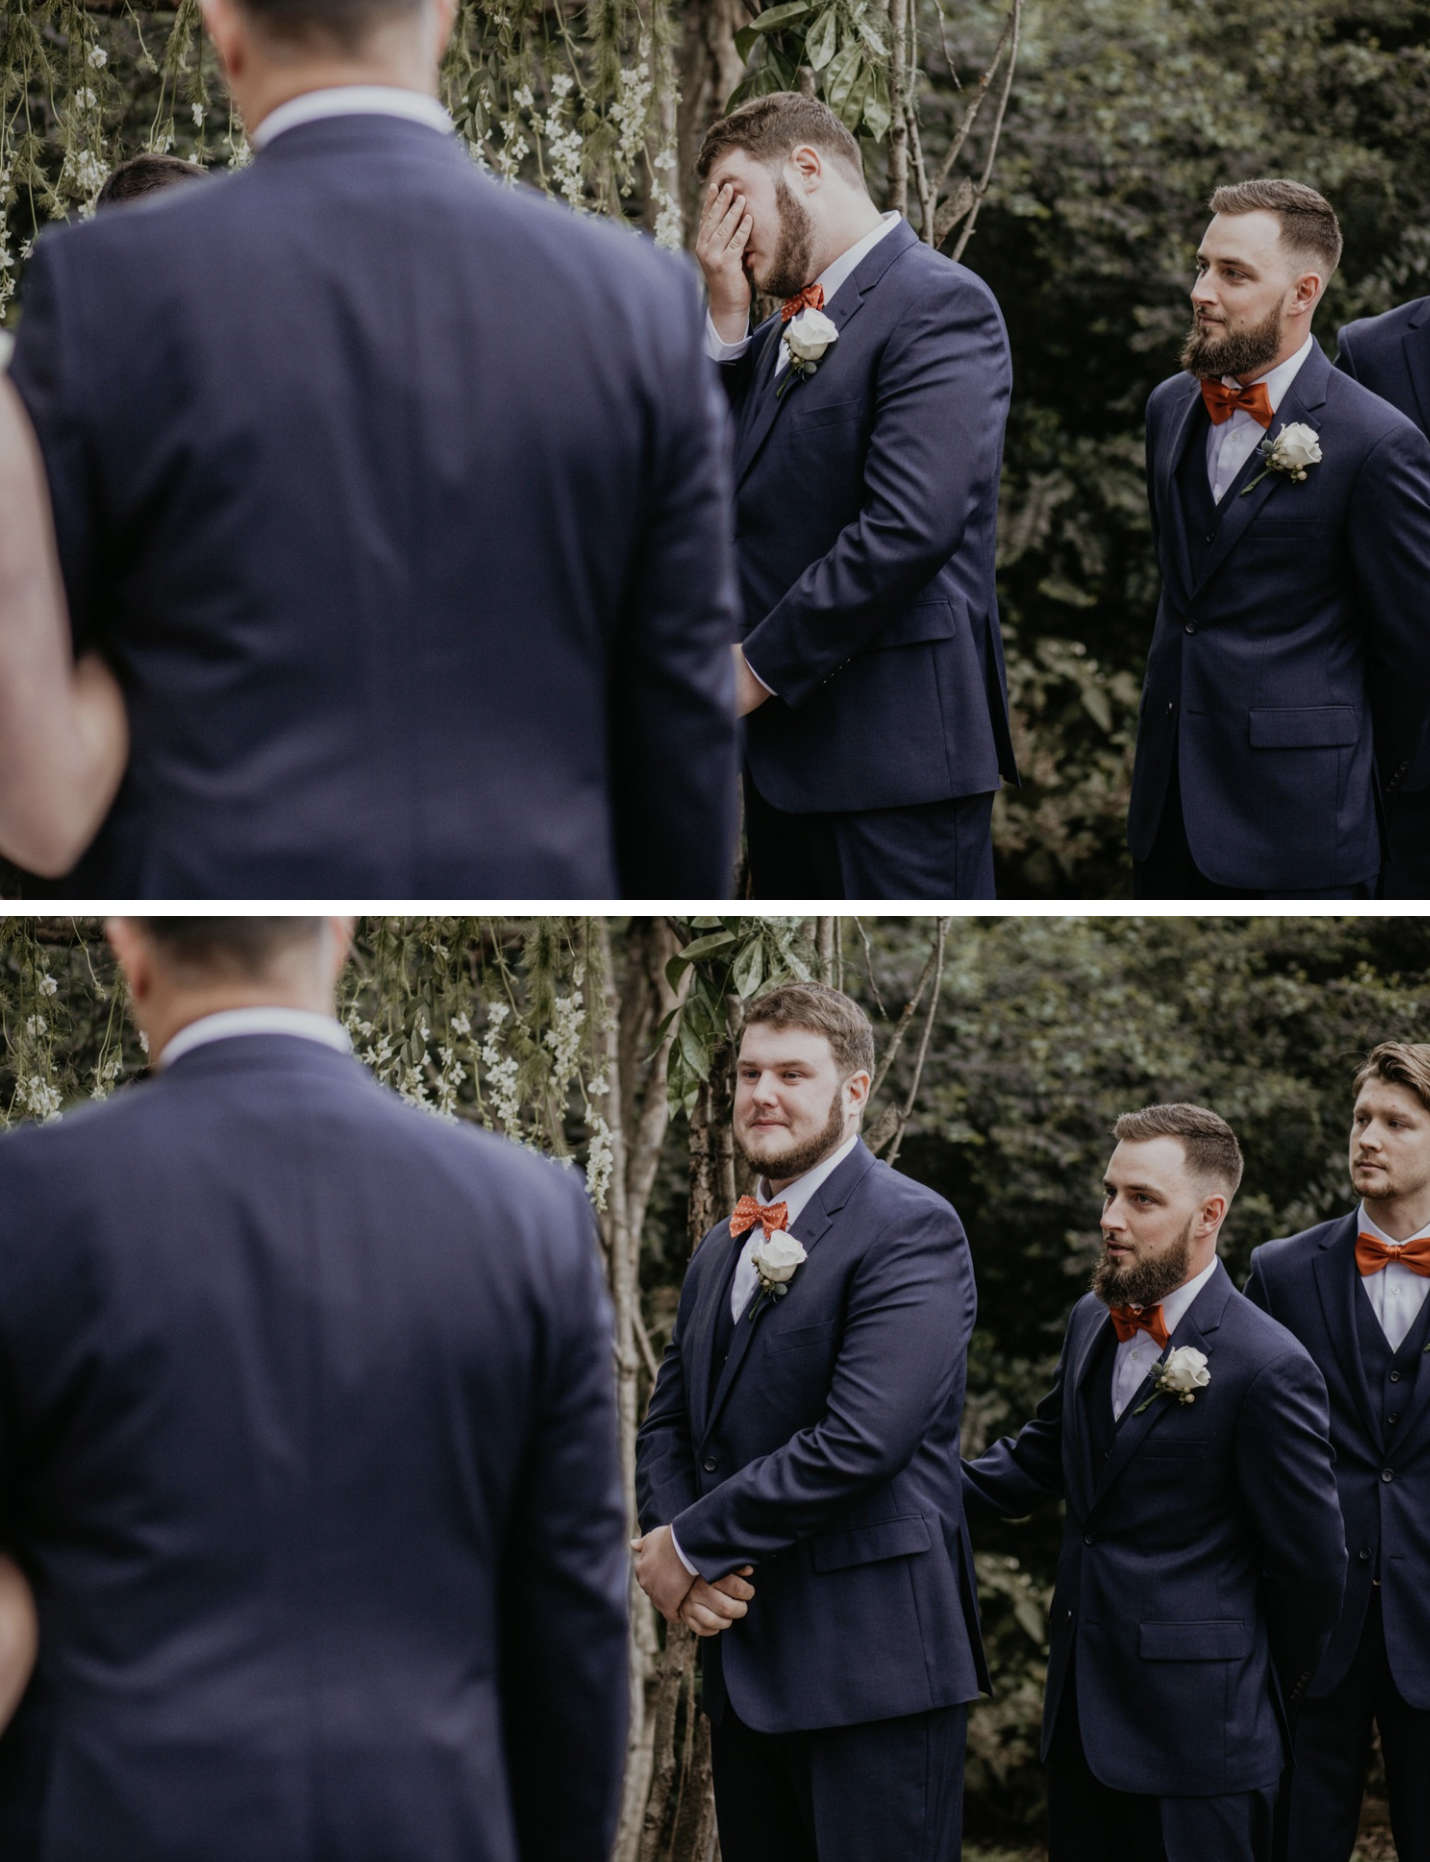 The groom gets emotional as his bride walks down the aisle.